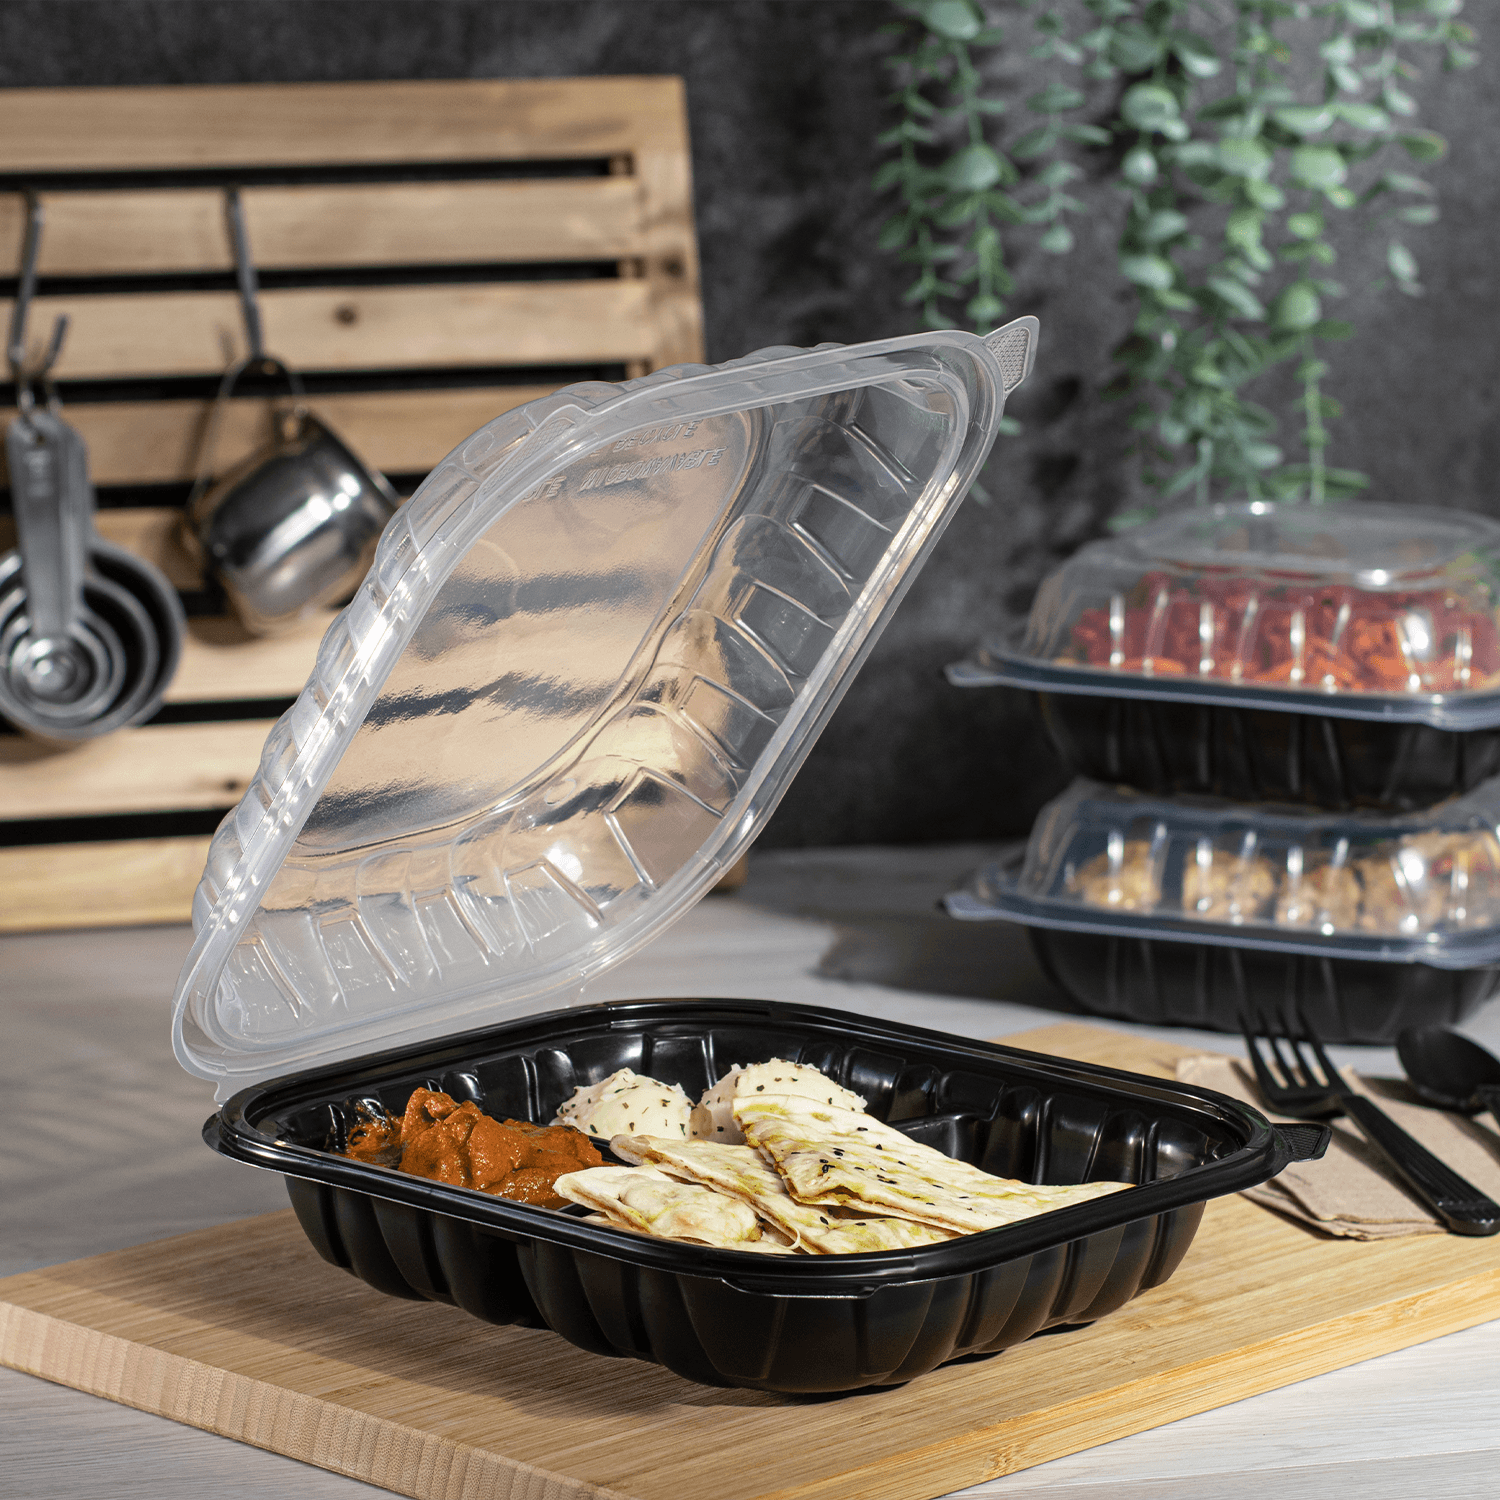 Black and Clear Karat 10.25"x 9" Premium PP Hinged Container with 3 compartments filled with food